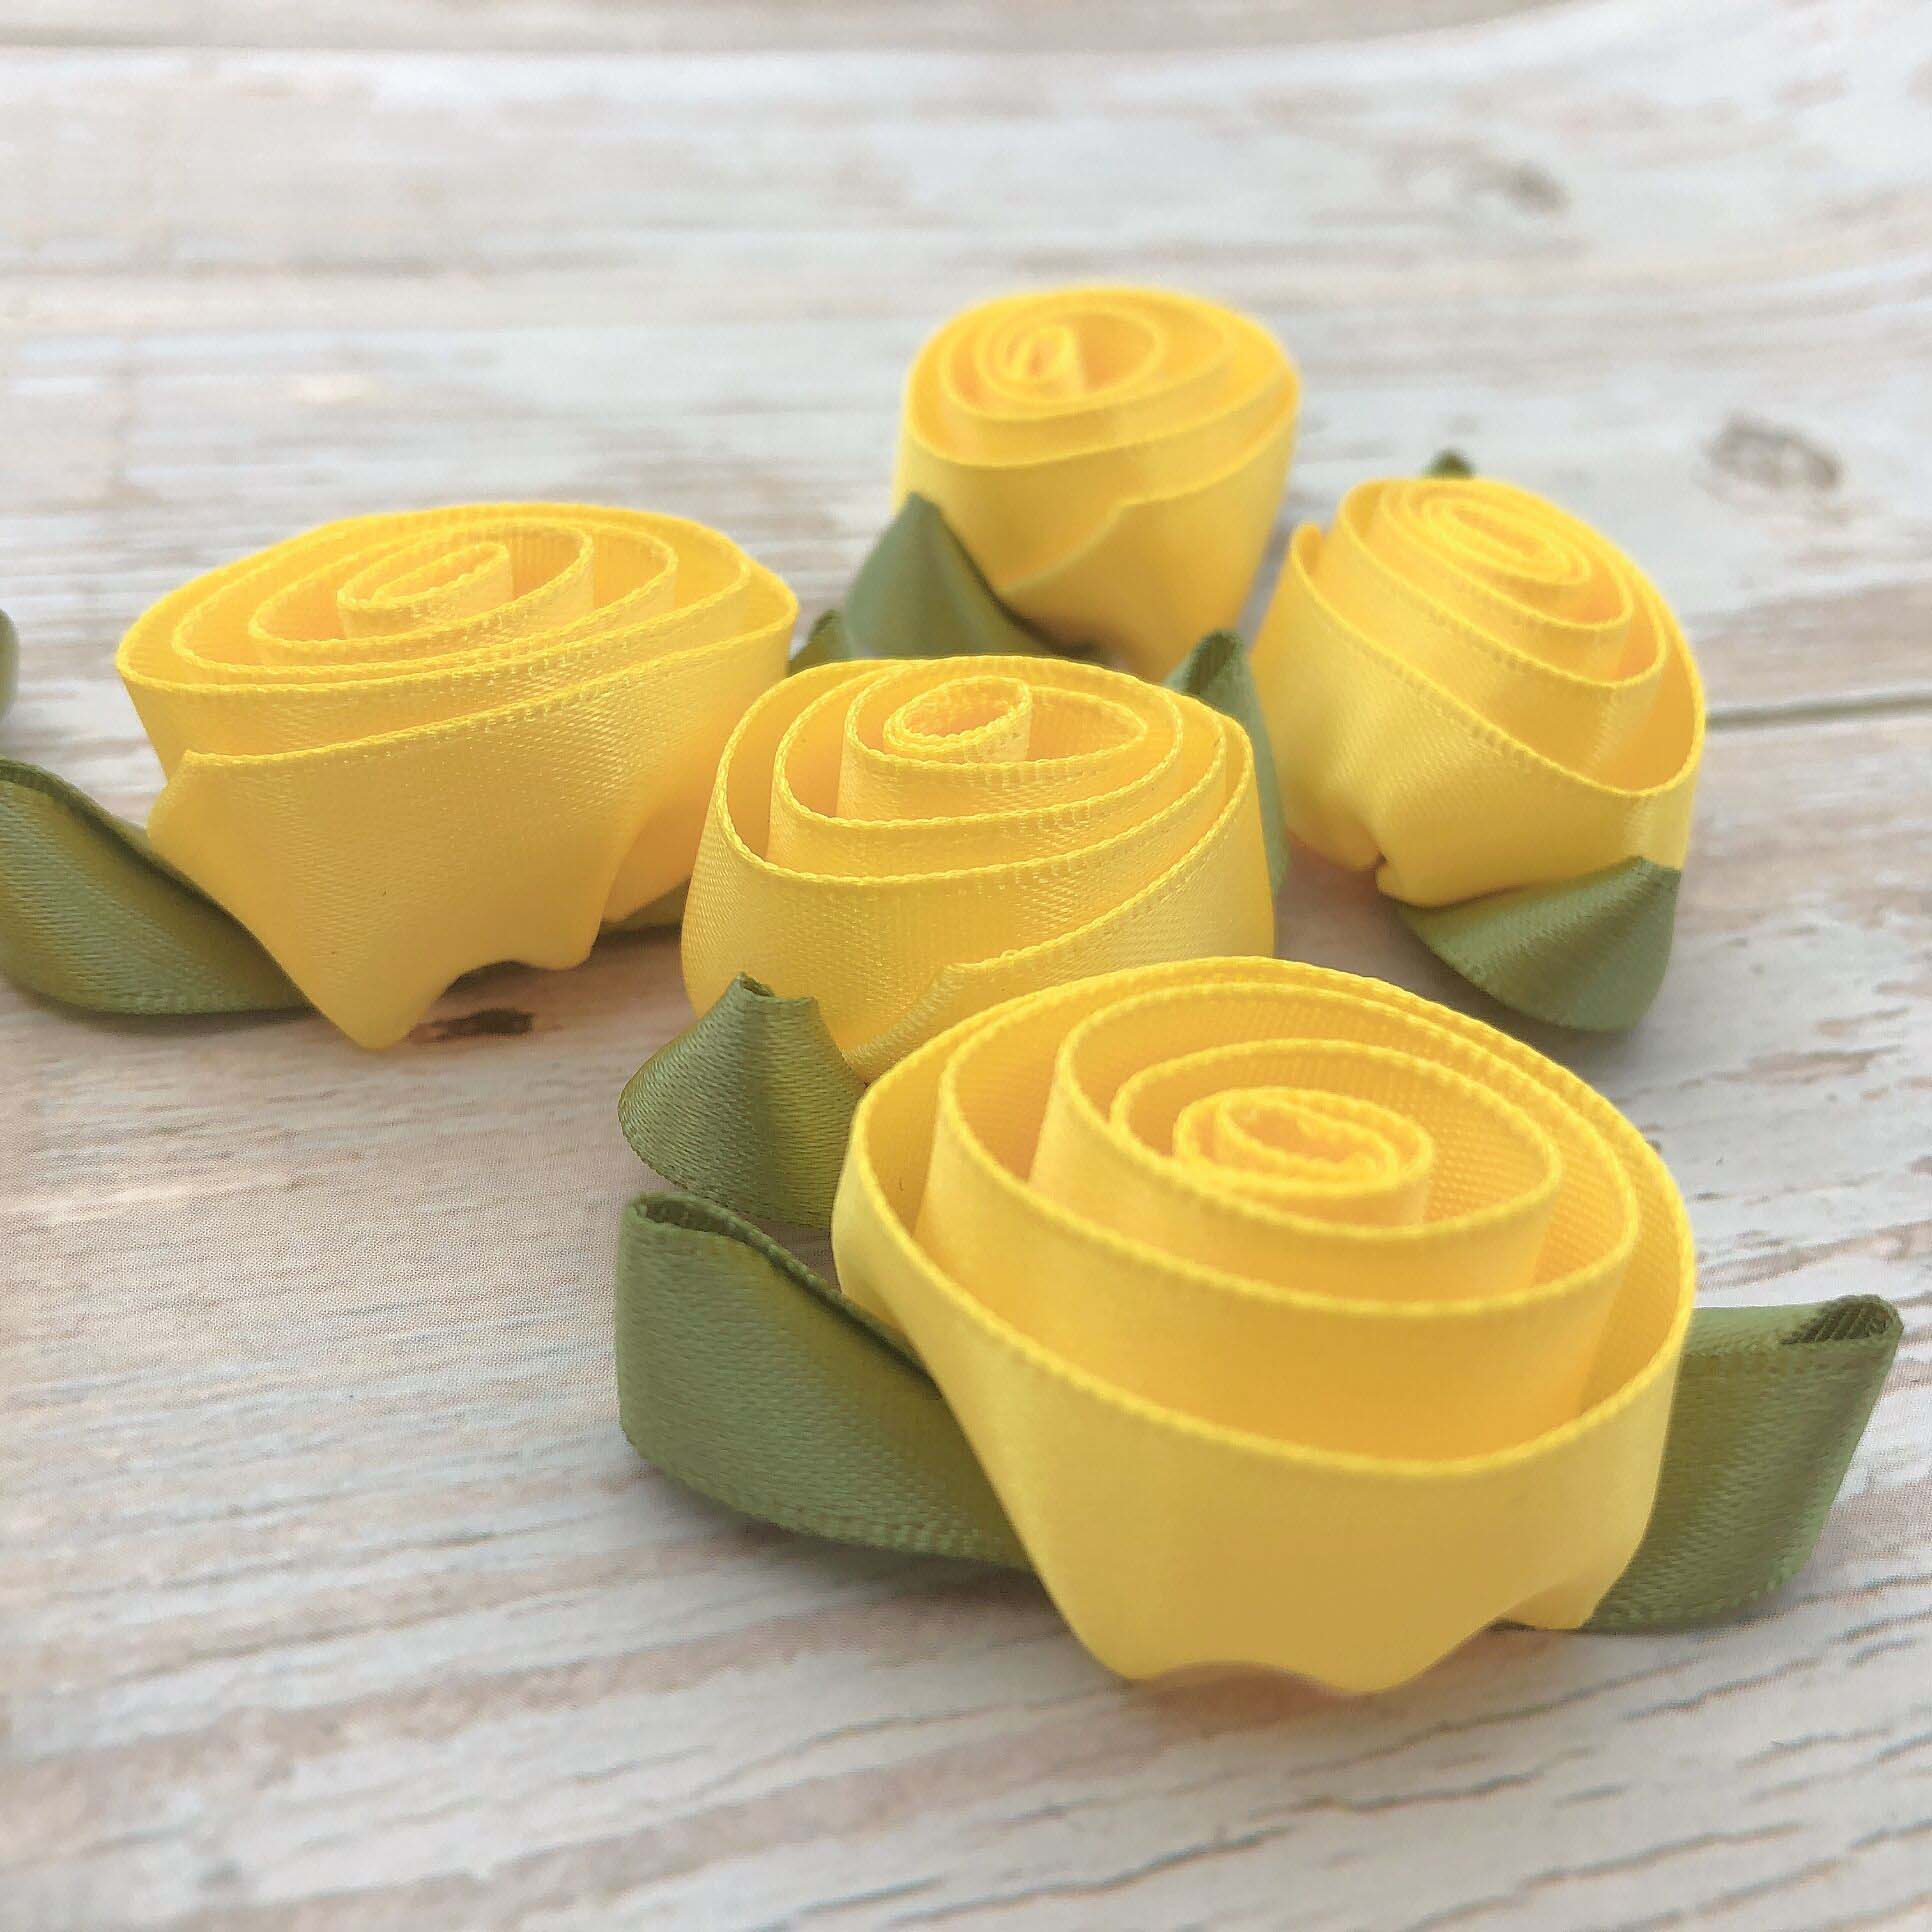 Gordon Ribbons 100% Polyester Custom Size And Color Small Ribbon Bow Yellow Rose With Green Leaves For Gauzy Skirts Decoration